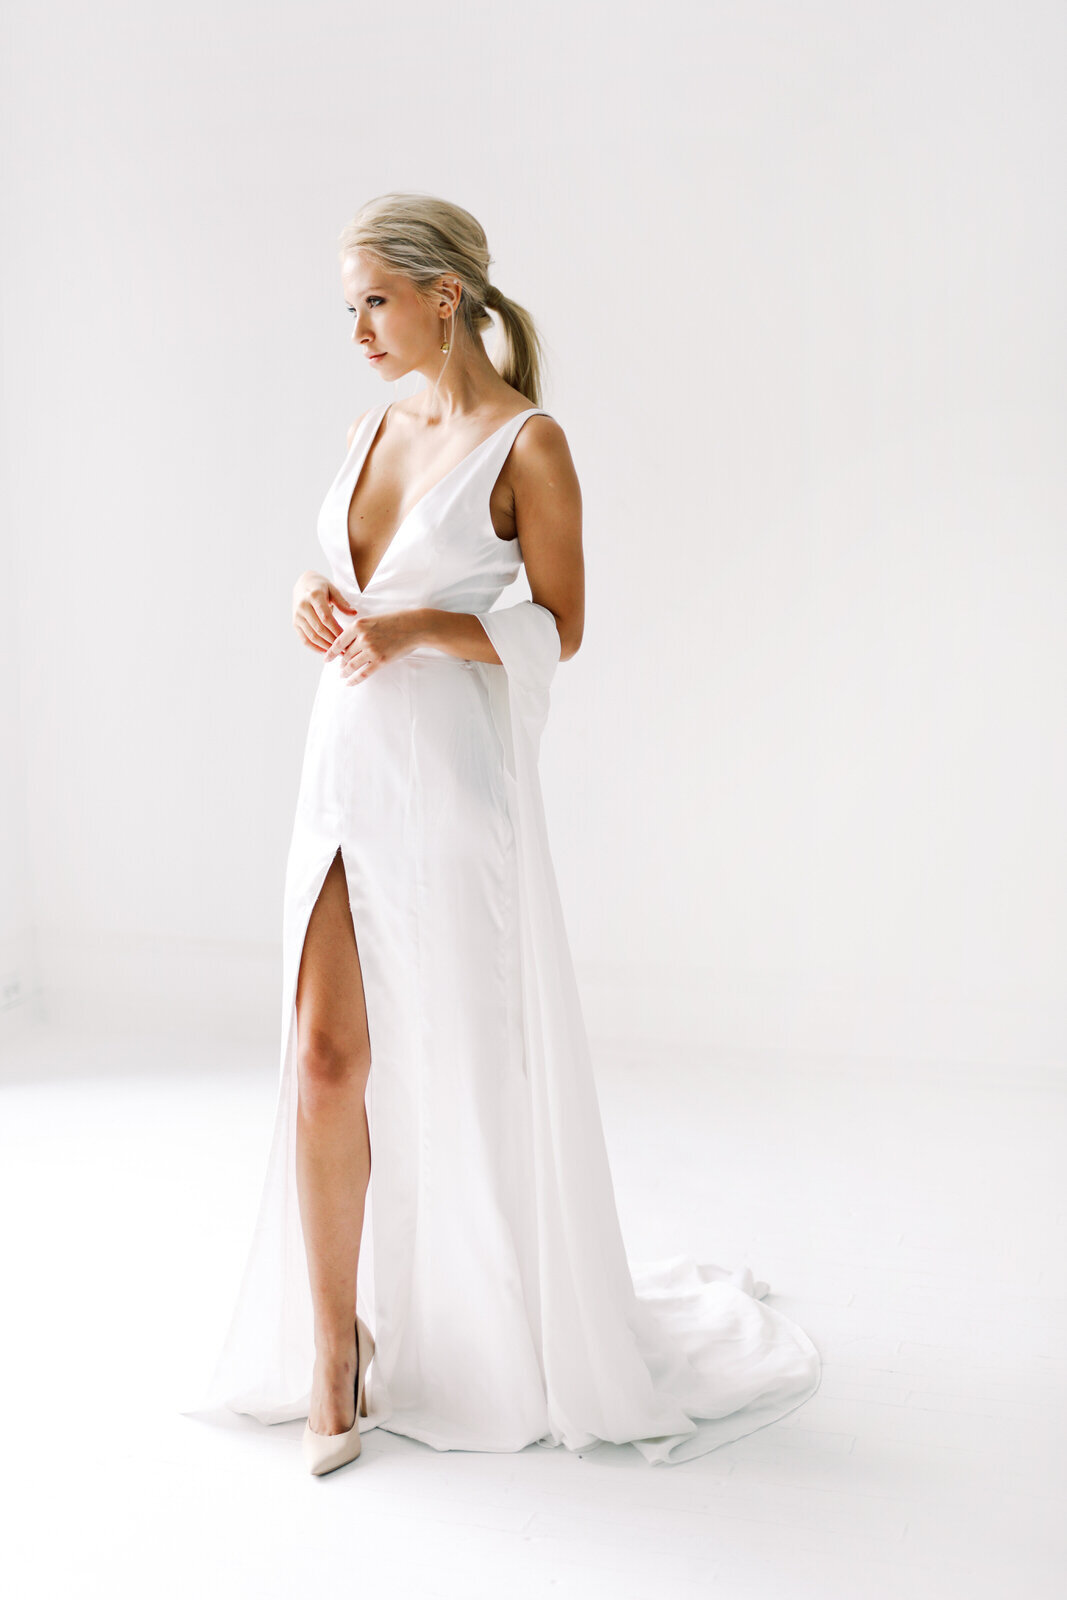 Stylish Bridal Editorial Photography for a New York City Brand 28